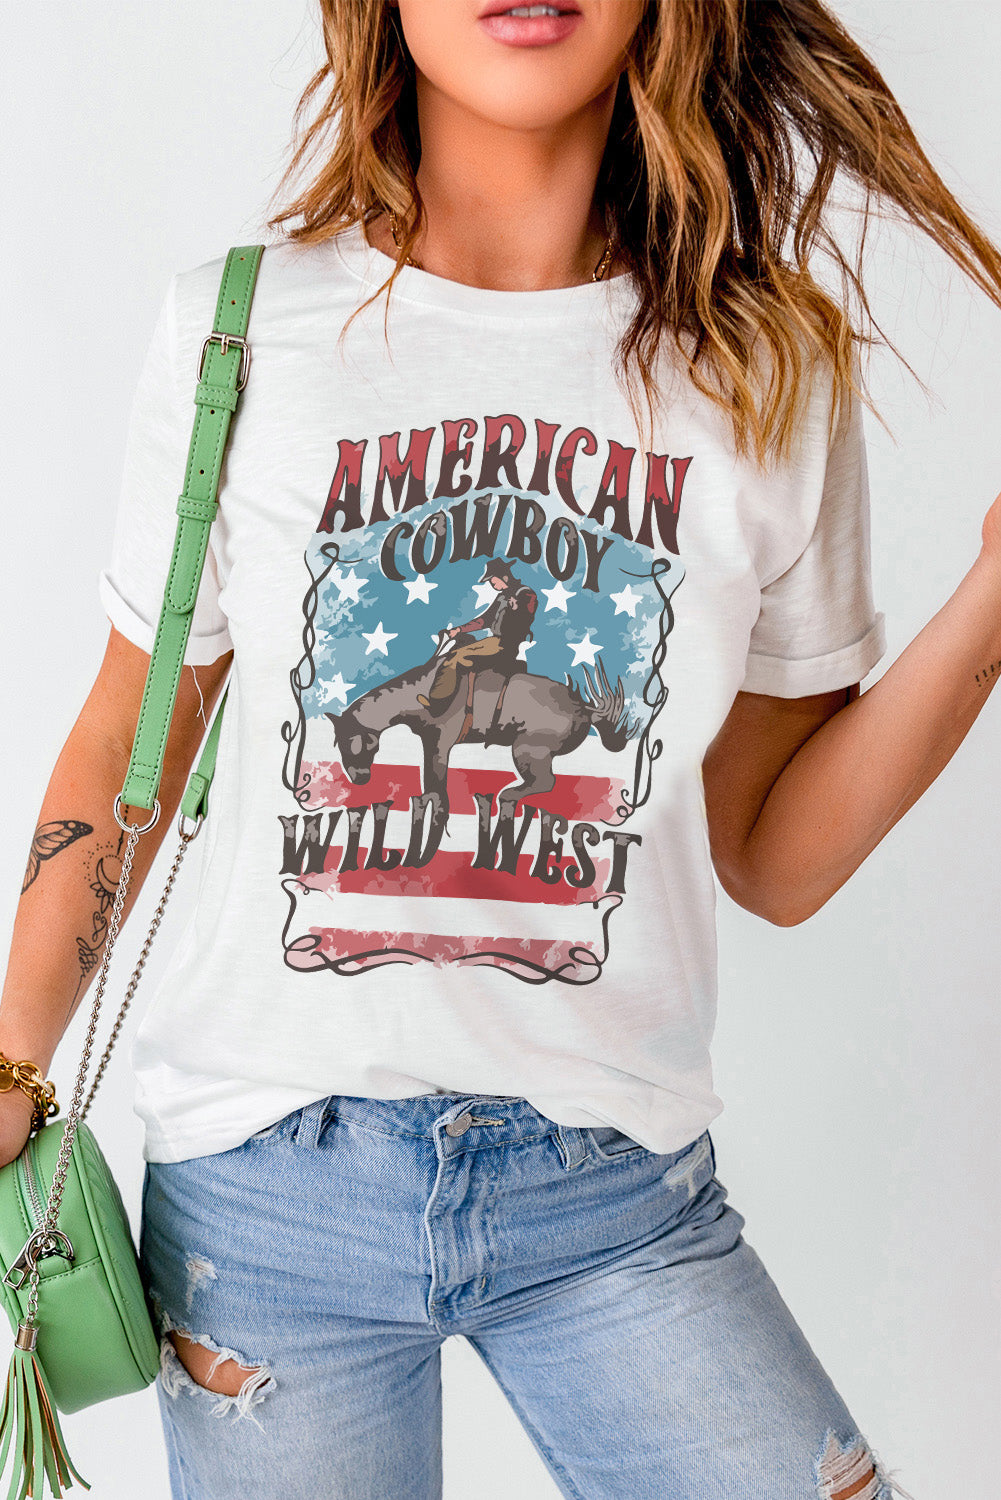 Ride the Frontier in Style with the American Cowboy Wild West Tee